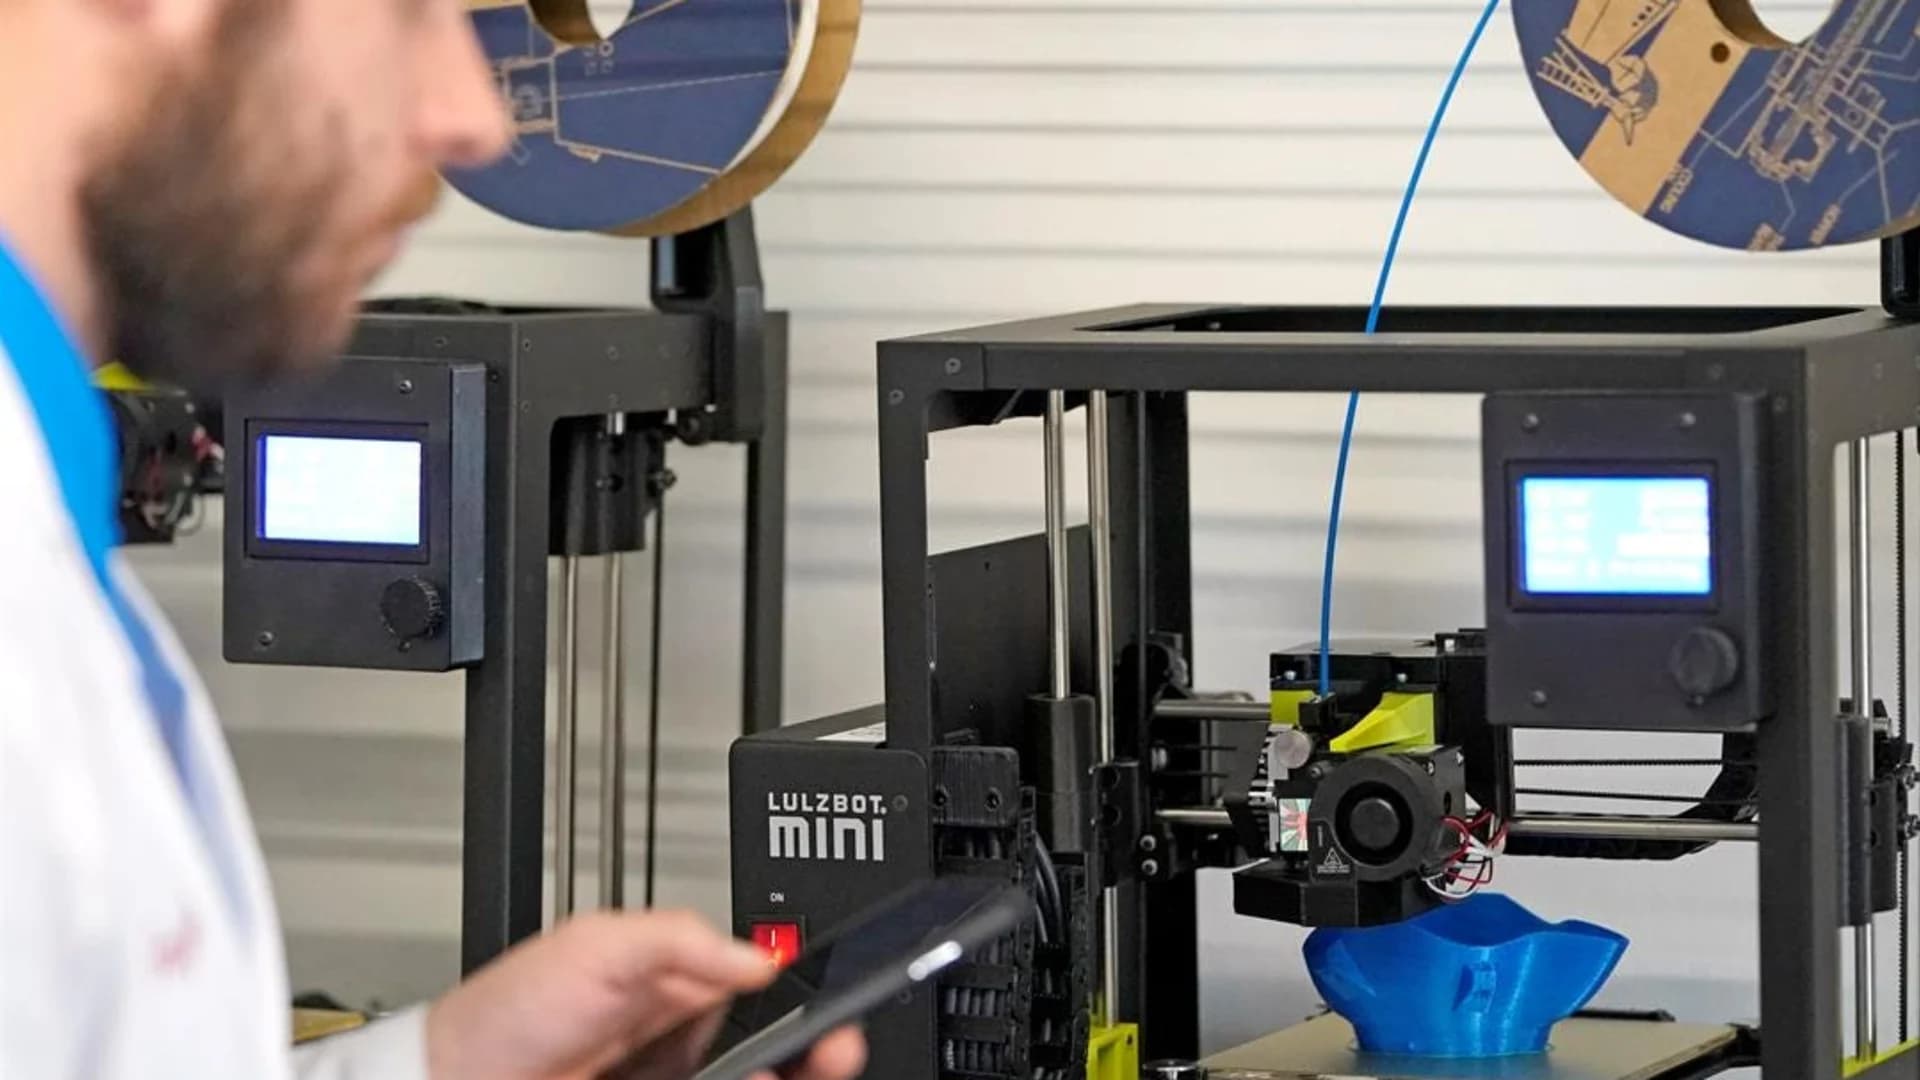 CUNY, SUNY harness 3D printers to provide PPE to front-line workers